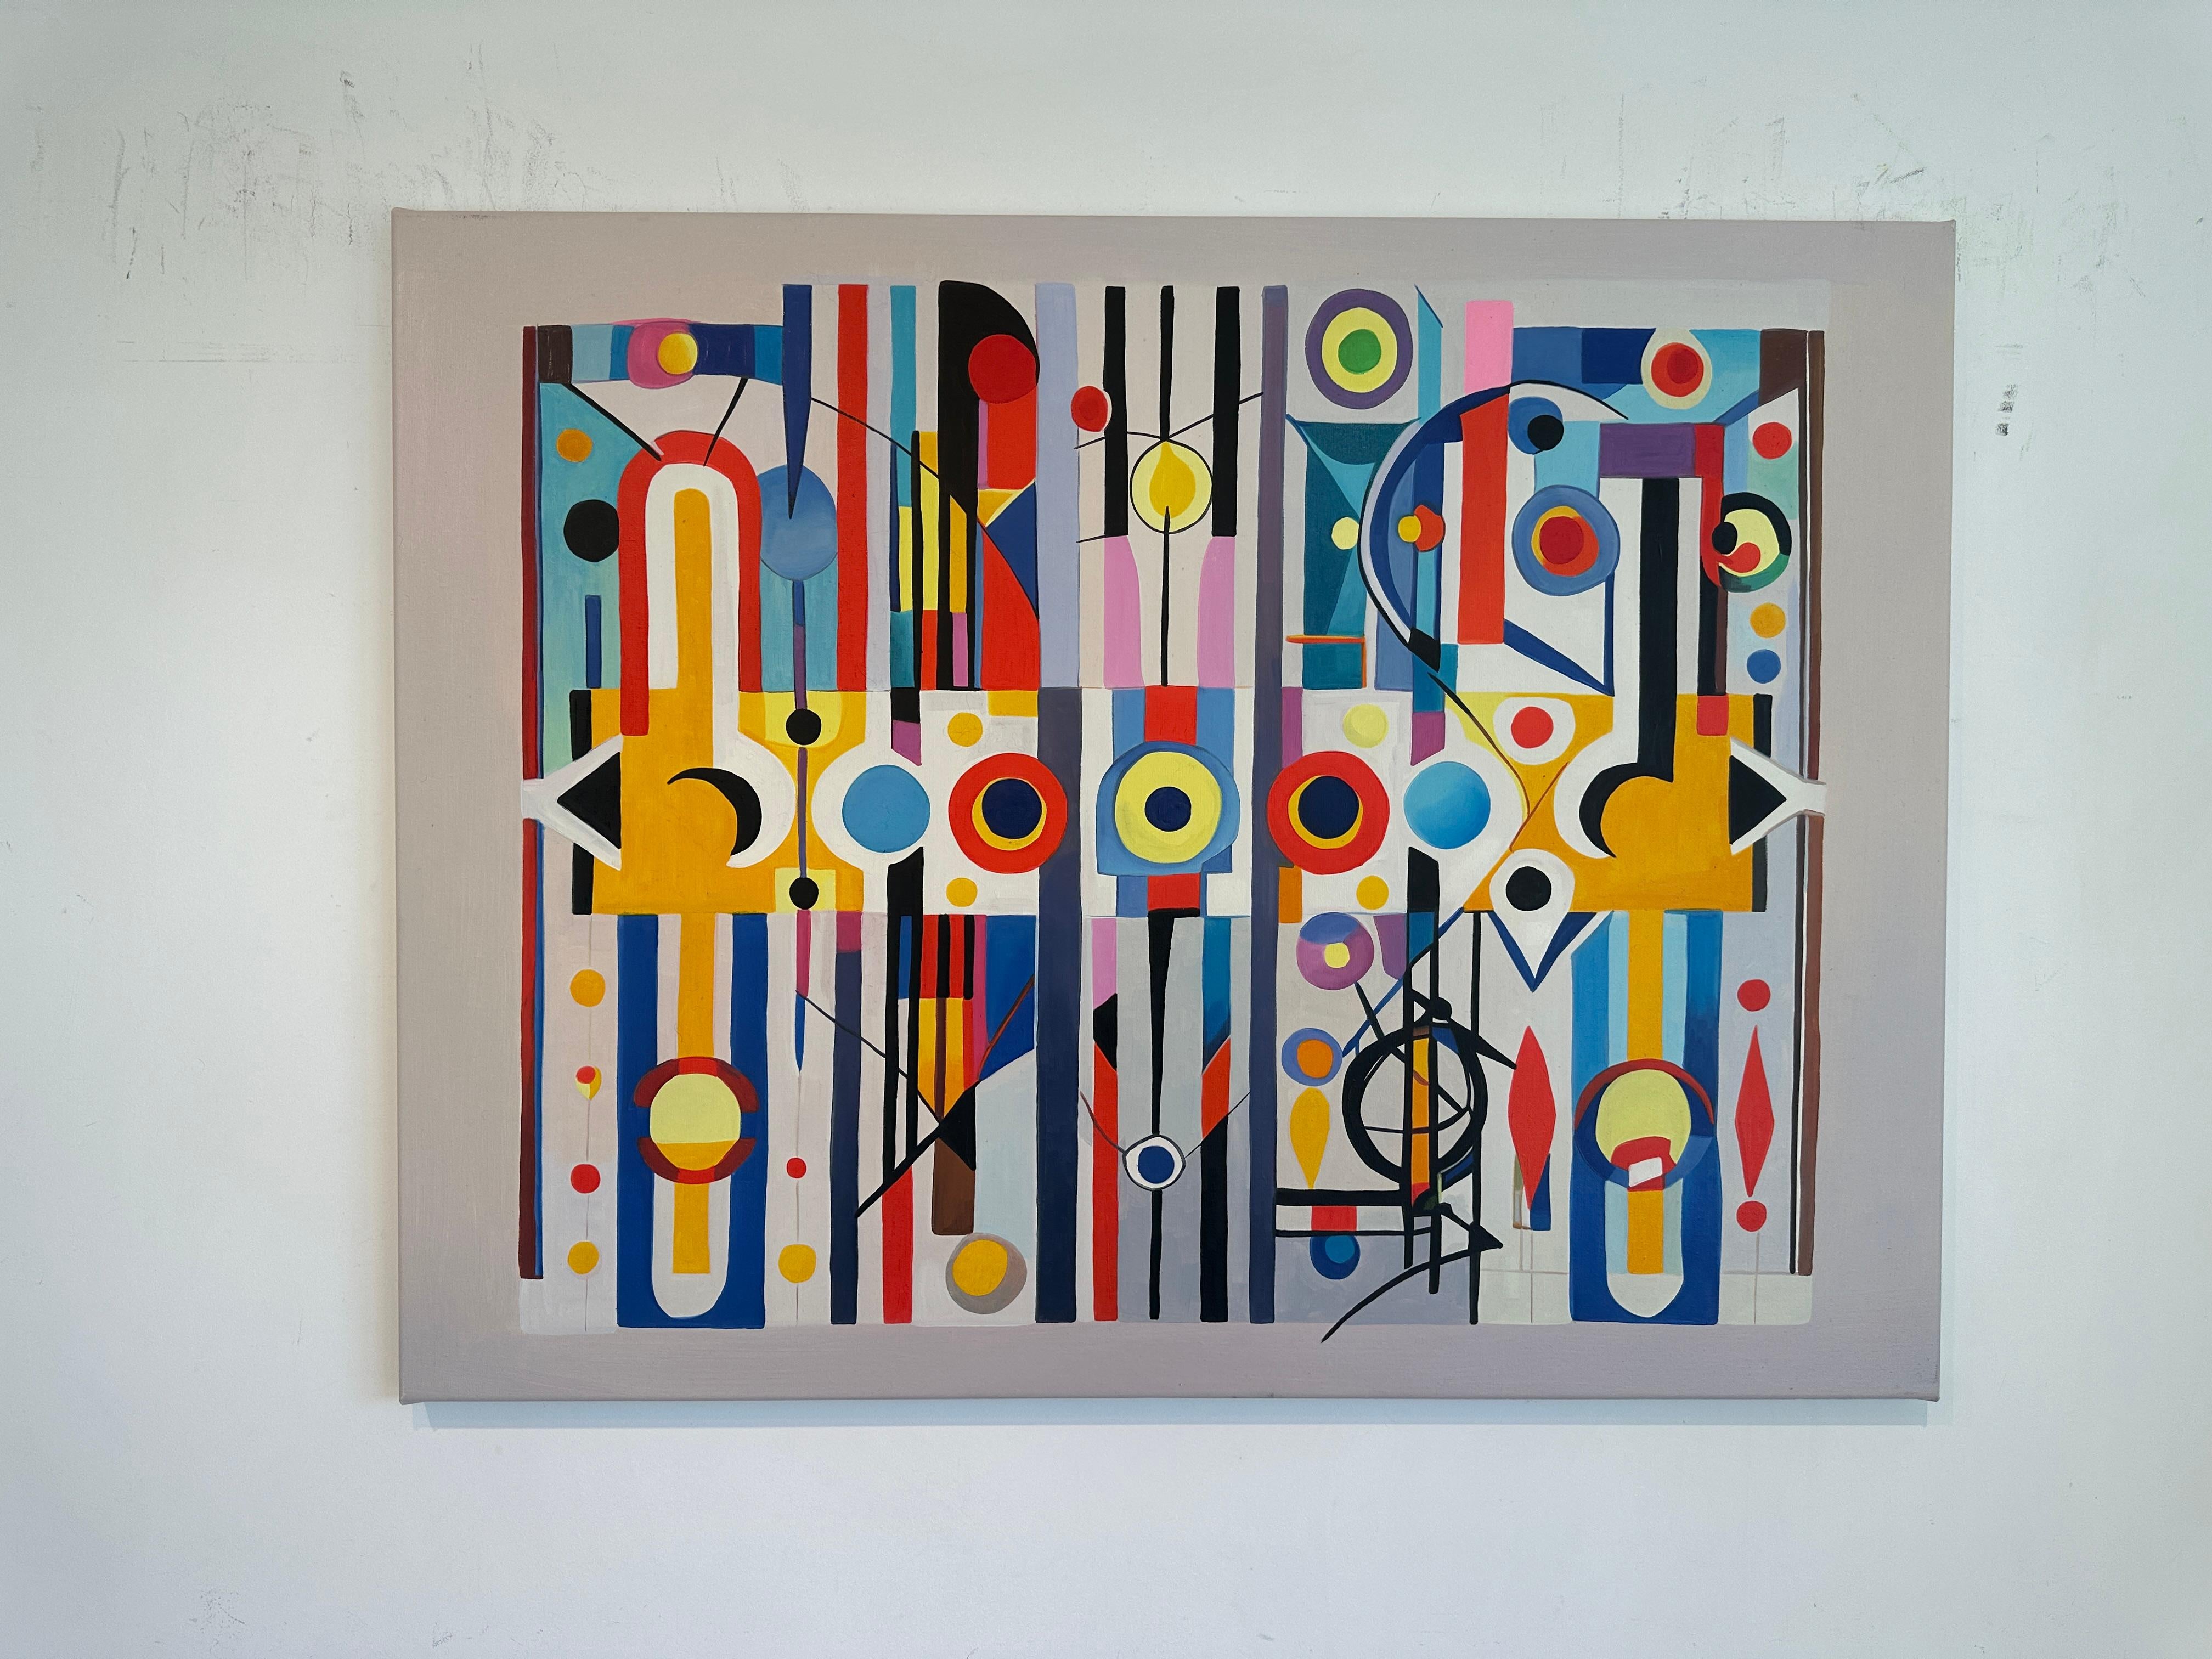 Lilly Muth's geometric abstractions are colourful works full figures that of space such as the distance, shape, size, and relative position of figures. Her use of colour is bold yet contemporary and her works are defined by clear lines and the